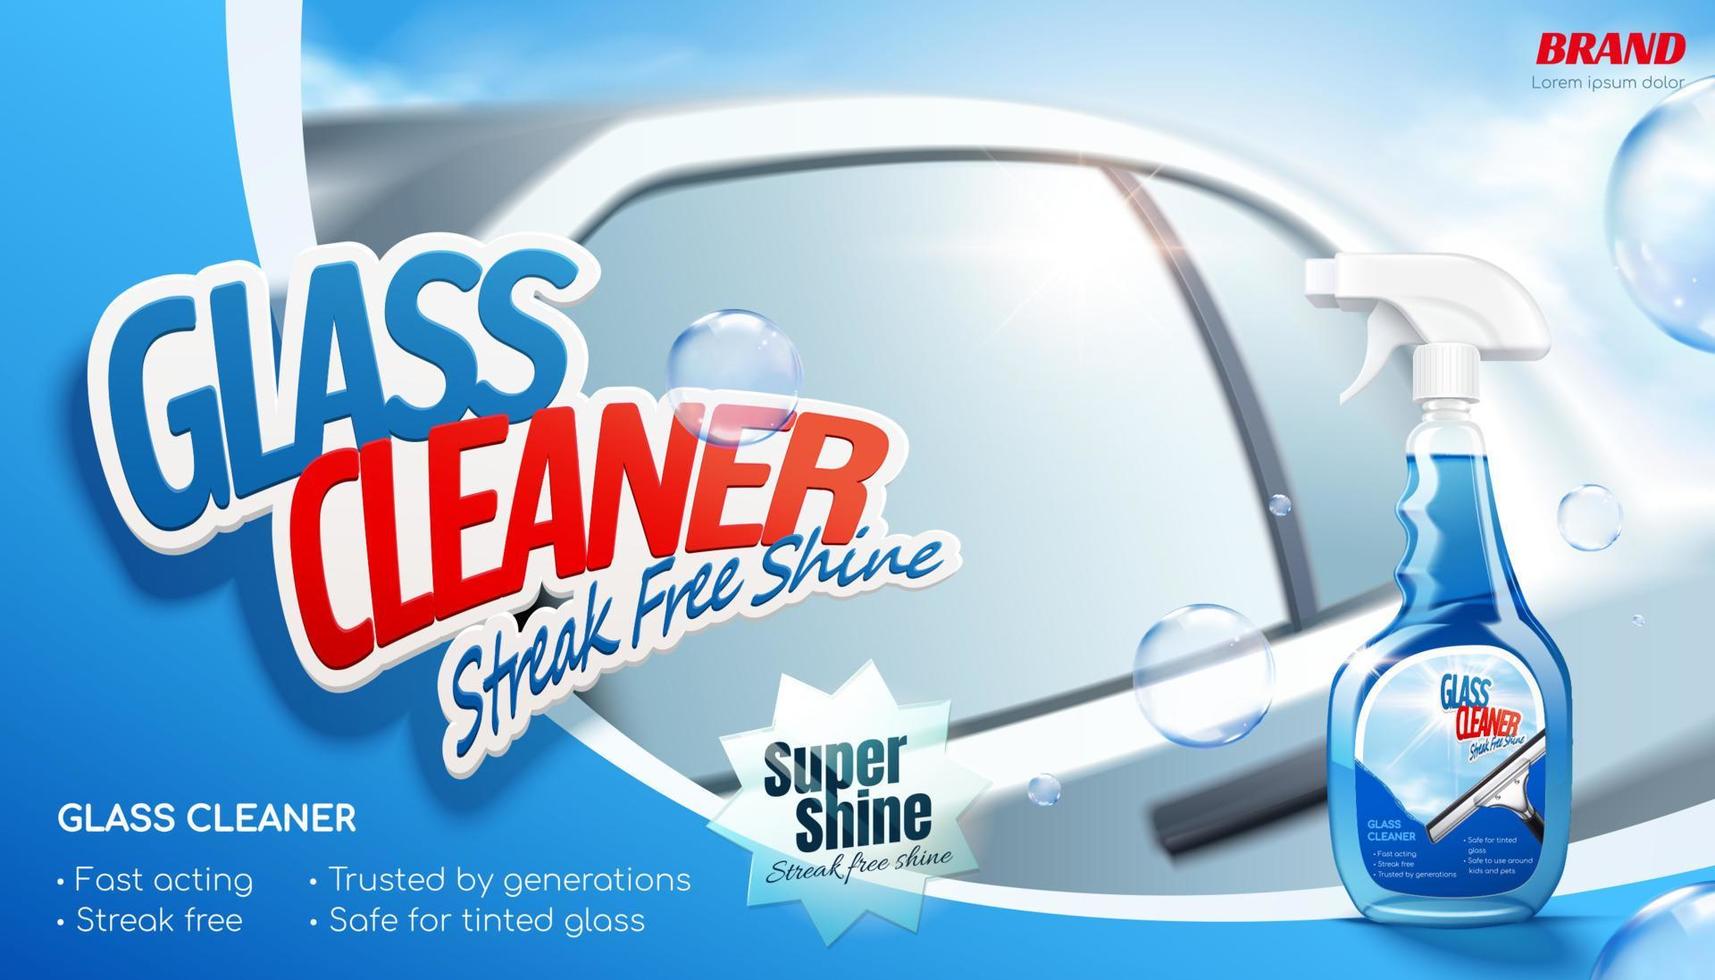 Streak free shine glass cleaner ad banner. 3D illustration of a realistic car in background with cleaner spray bottle package and bubbles flying in the air vector